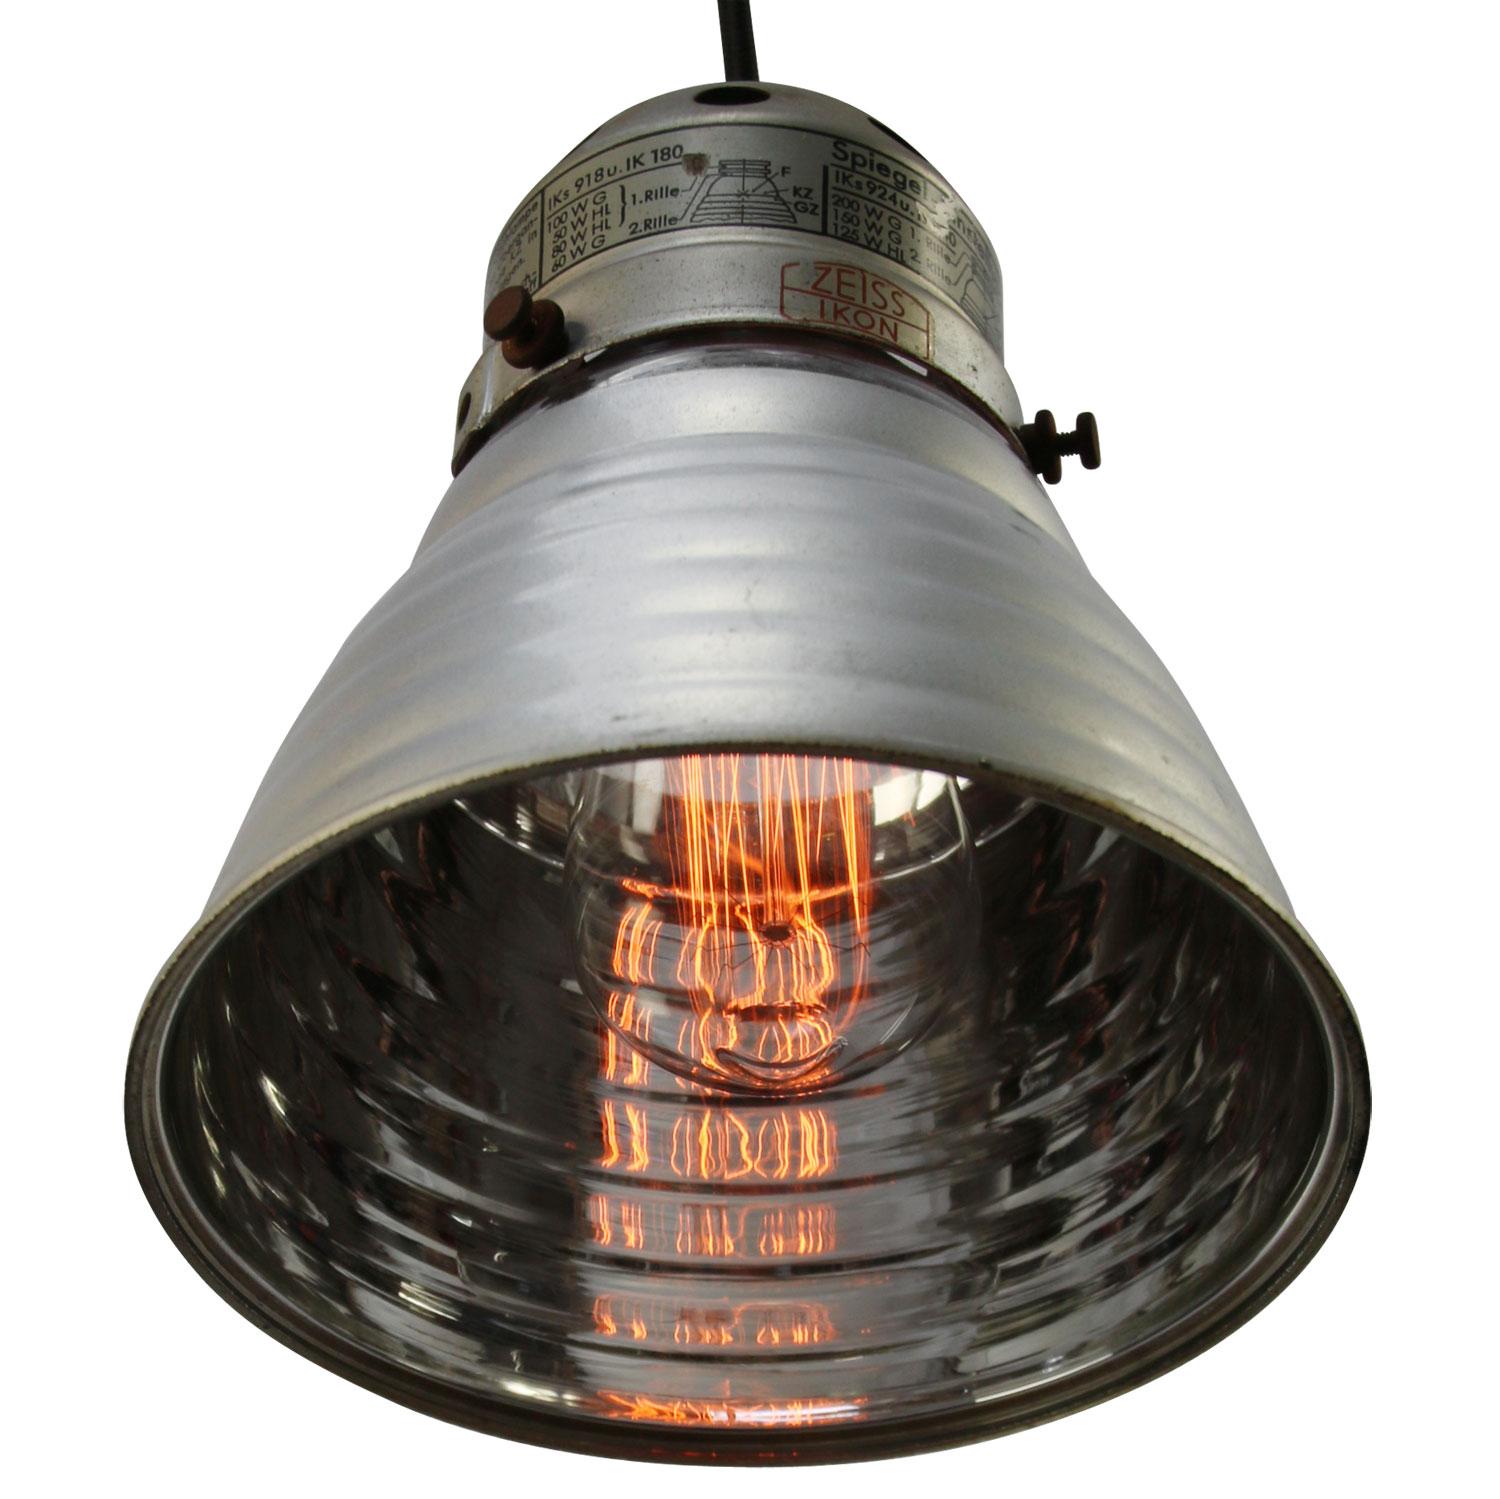 Zeiss Ikon mirror glass pendant
Aluminium top
2 meter black wire

excluding light bulb

E27 / E26

Weight: 1.20 kg / 2.6 lb

Priced per individual item. All lamps have been made suitable by international standards for incandescent light